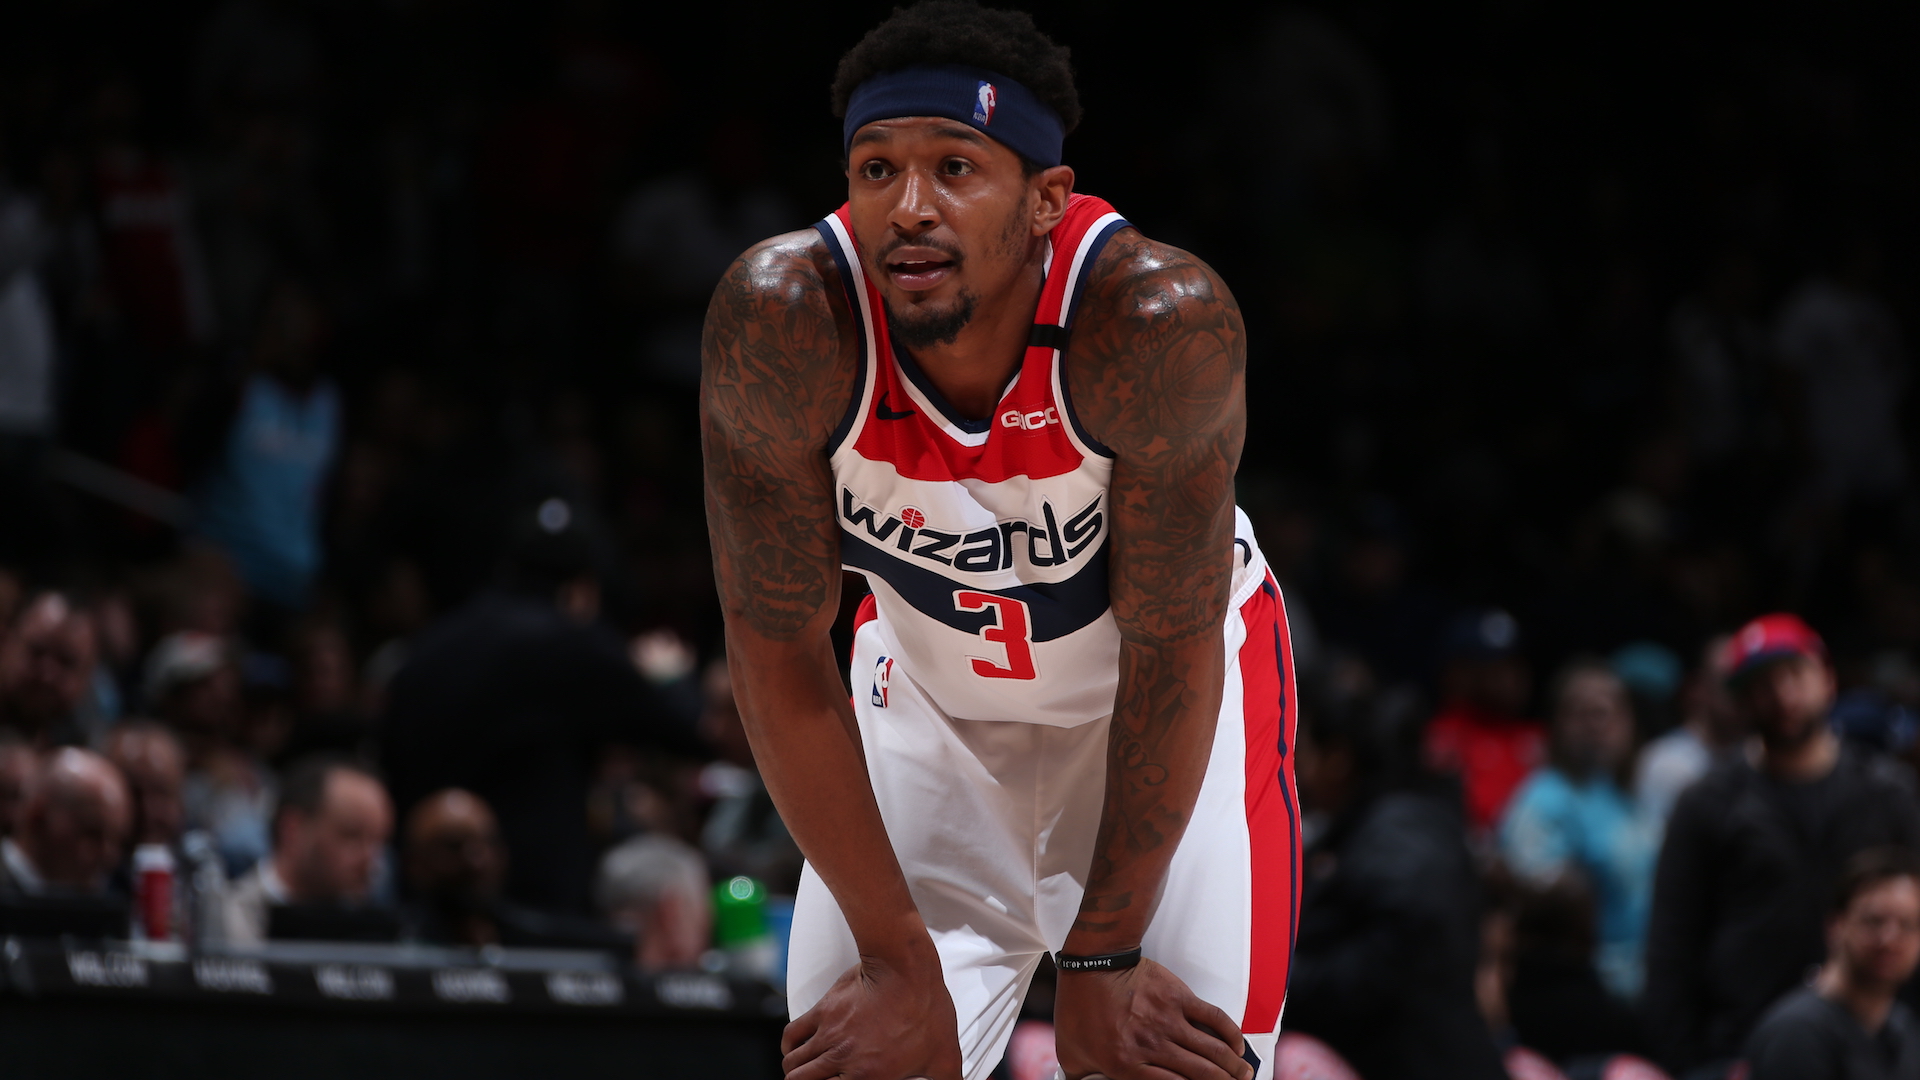 Bradley Beal looks on during the game against the Miami Heat.